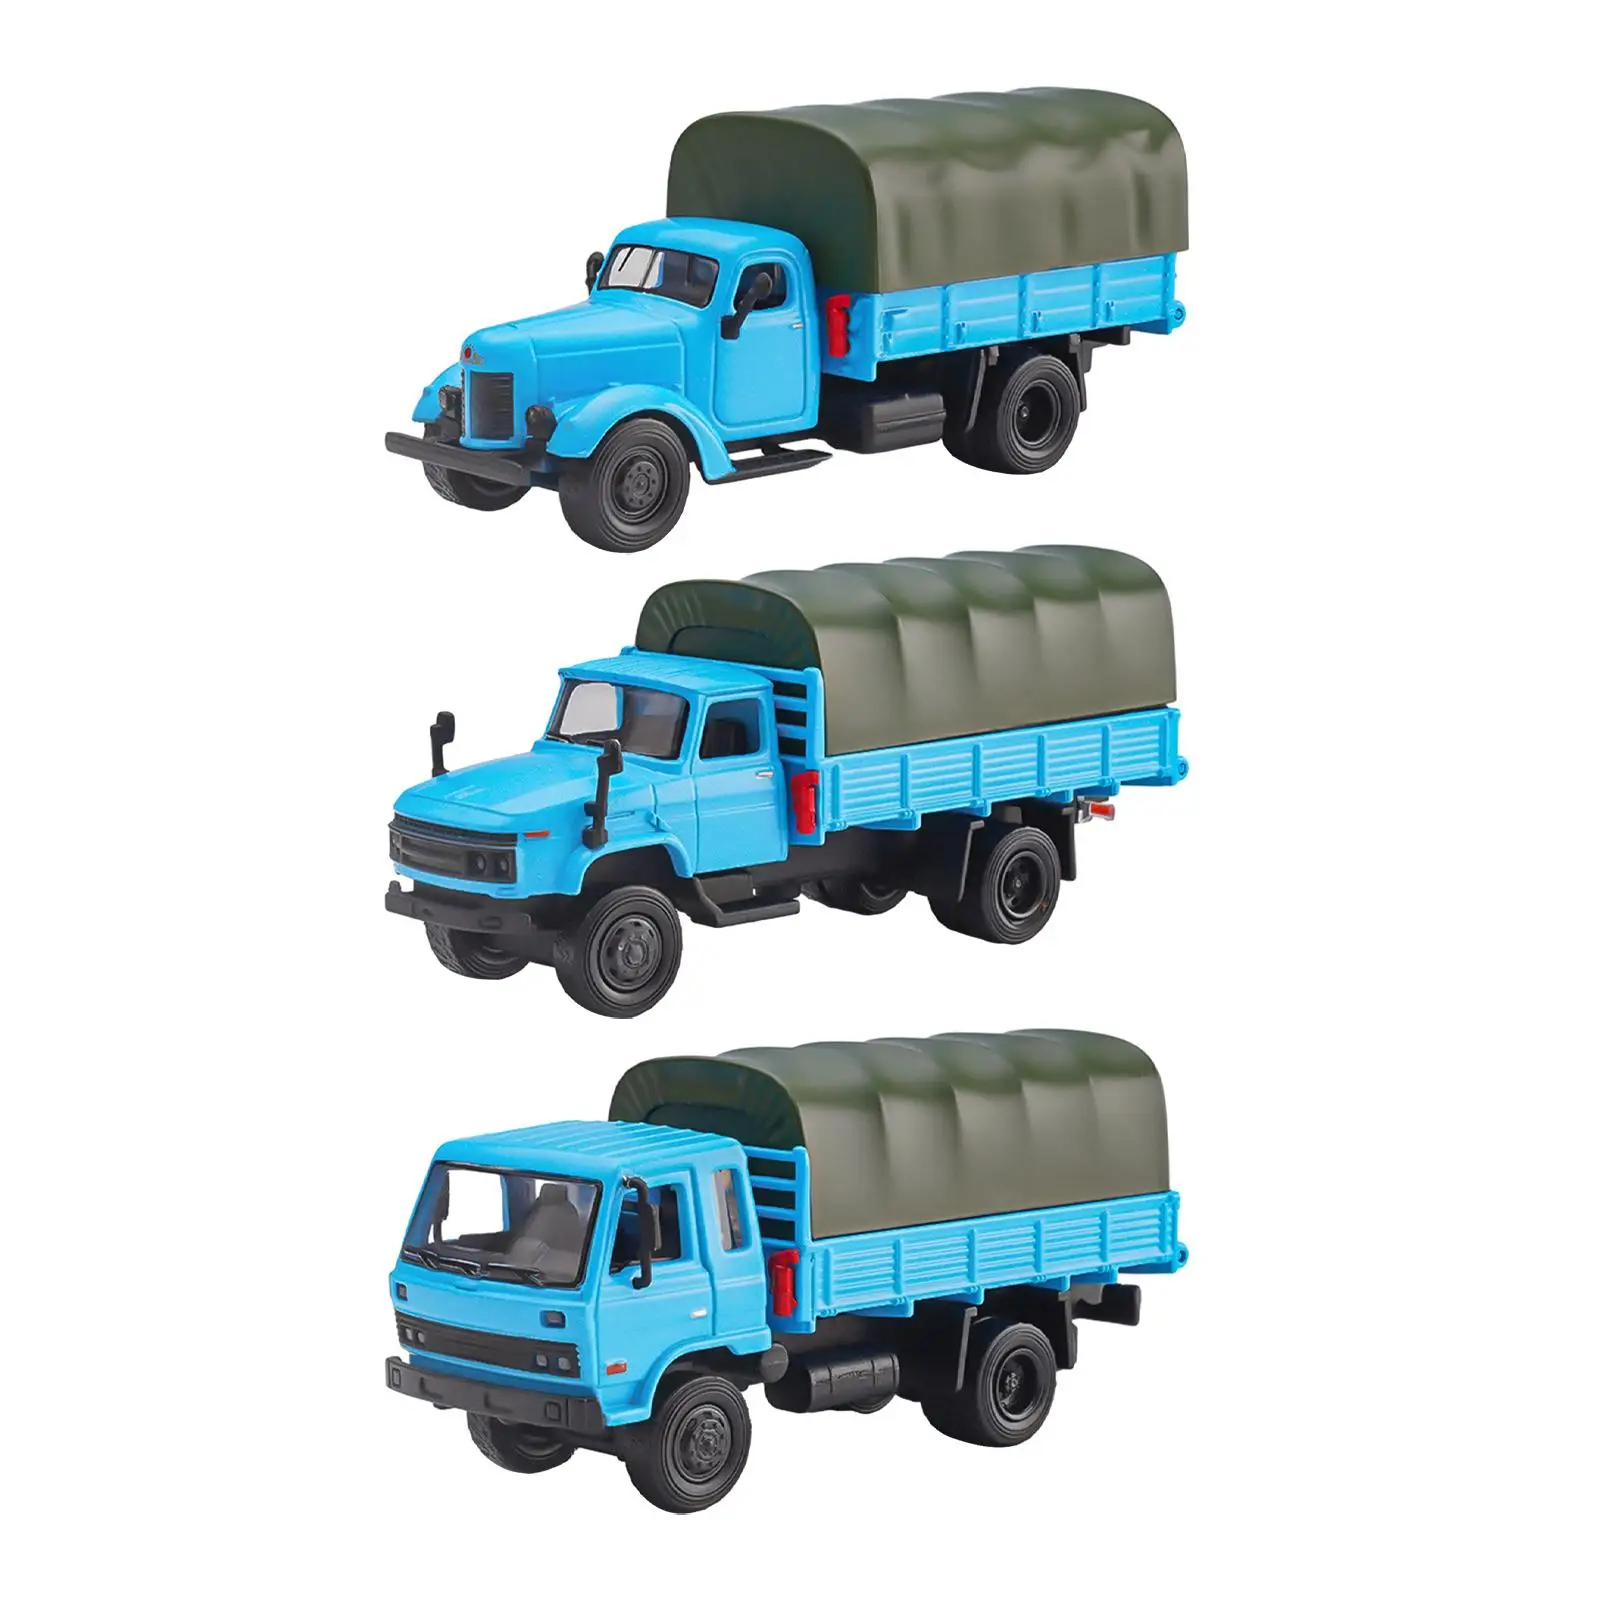 1/64 Transport Vehicle Desktop Ornament Train Railway Hand Painted Alloy Truck Mini Carrier Vehicle for Kids Adults Ornaments